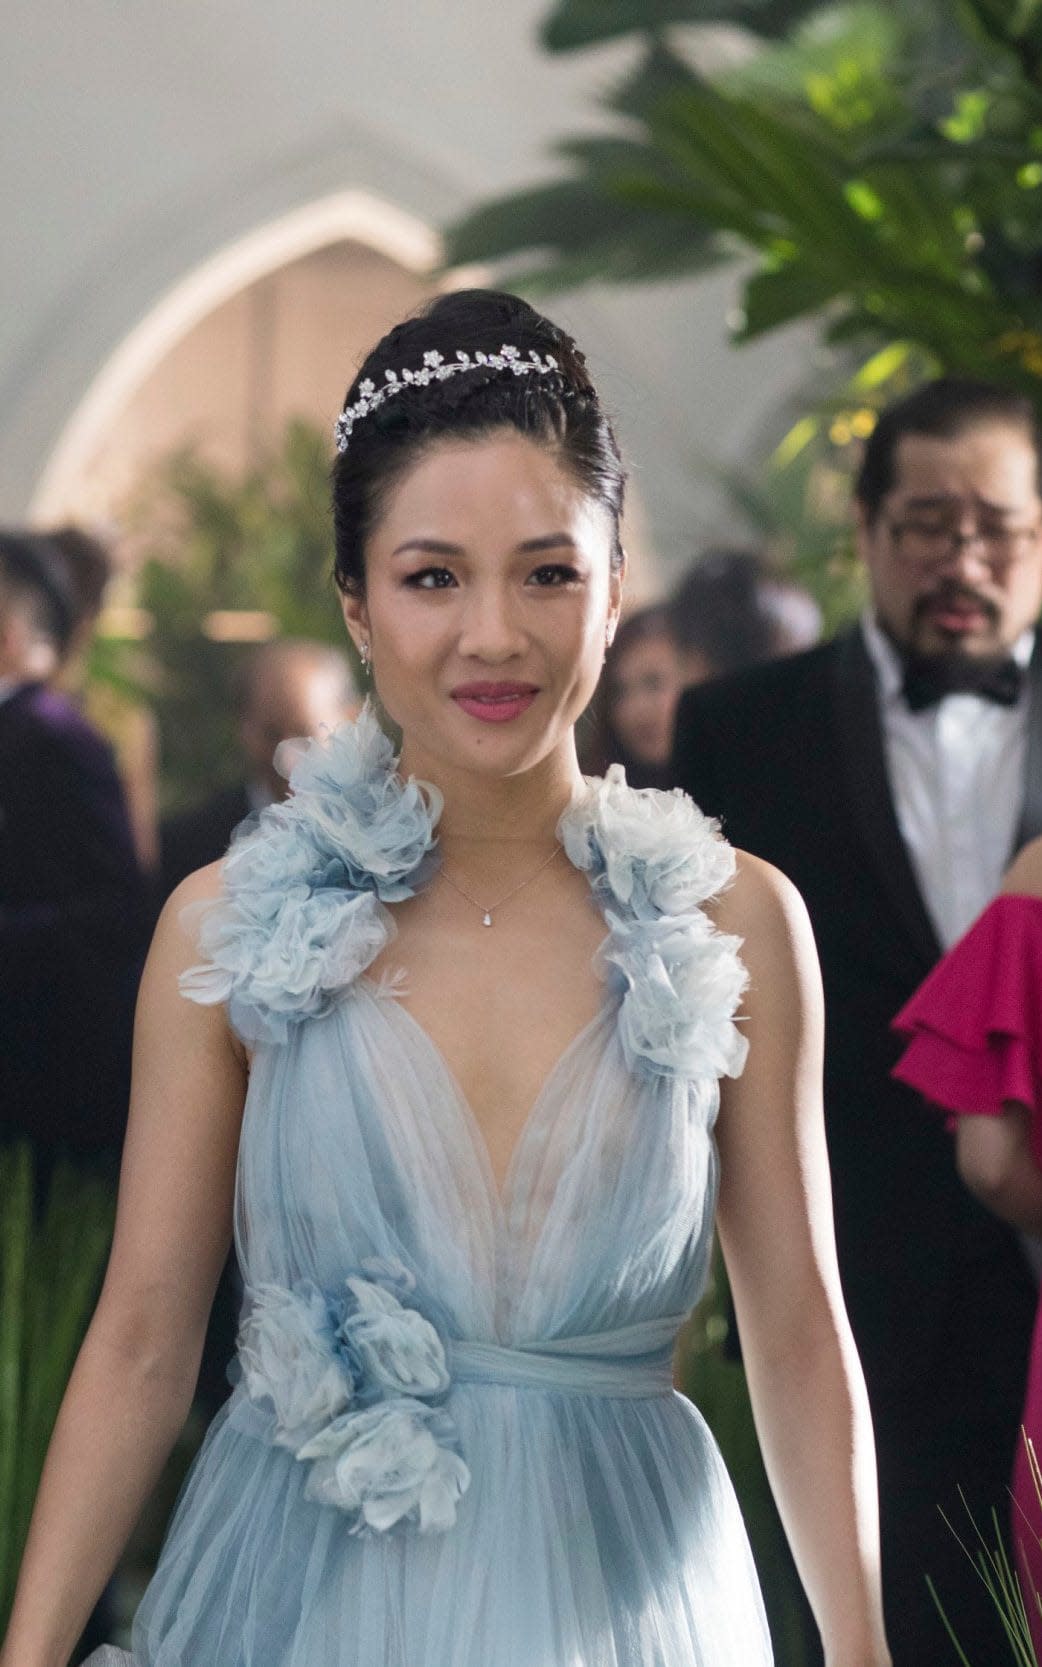 Constance Wu in a scene from the film